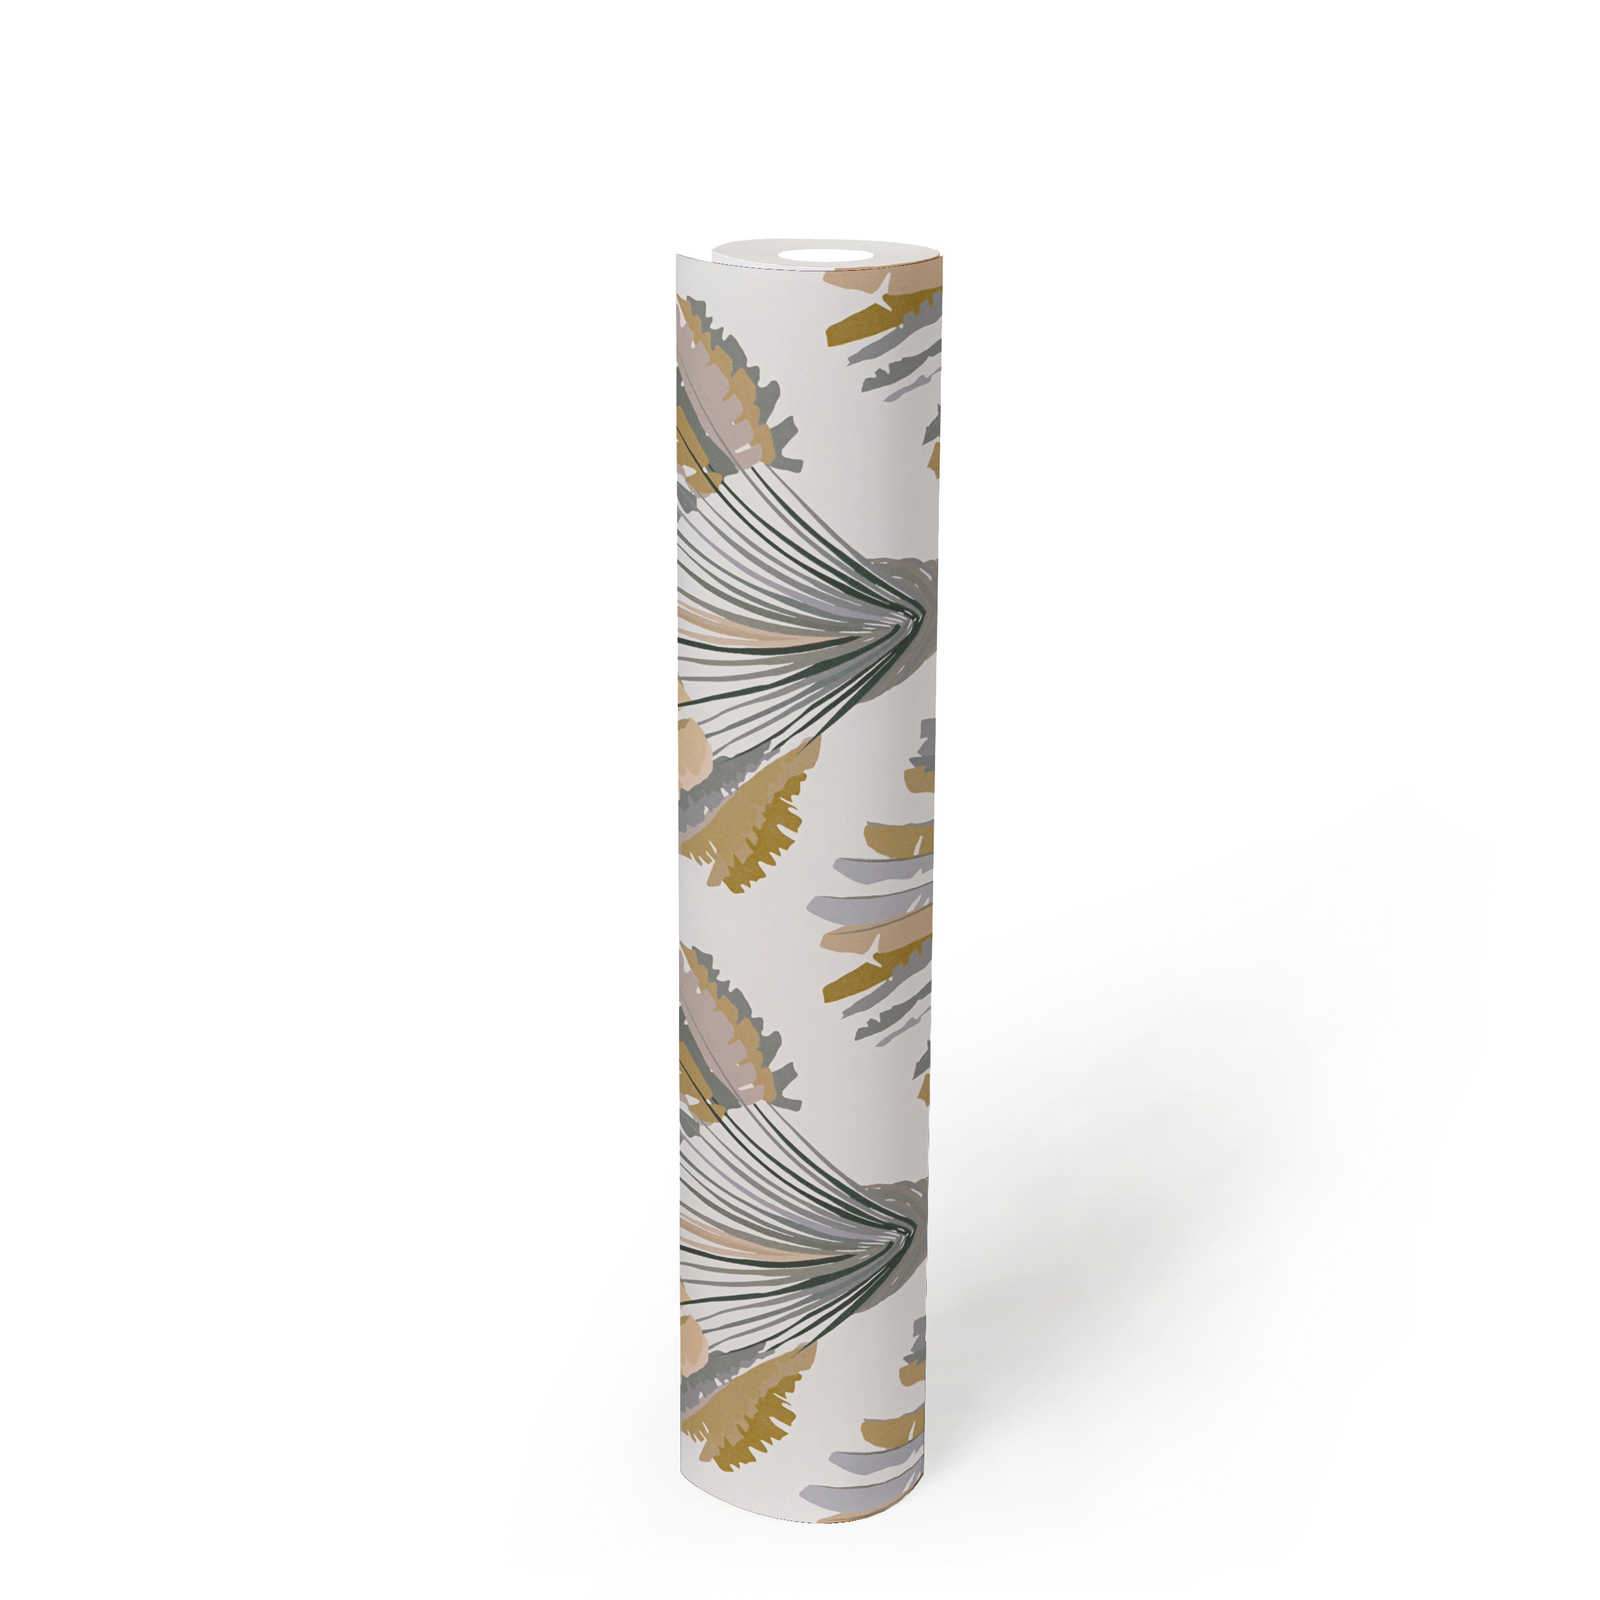             Palm trees wallpaper with pattern print in modern style - yellow, grey, white
        